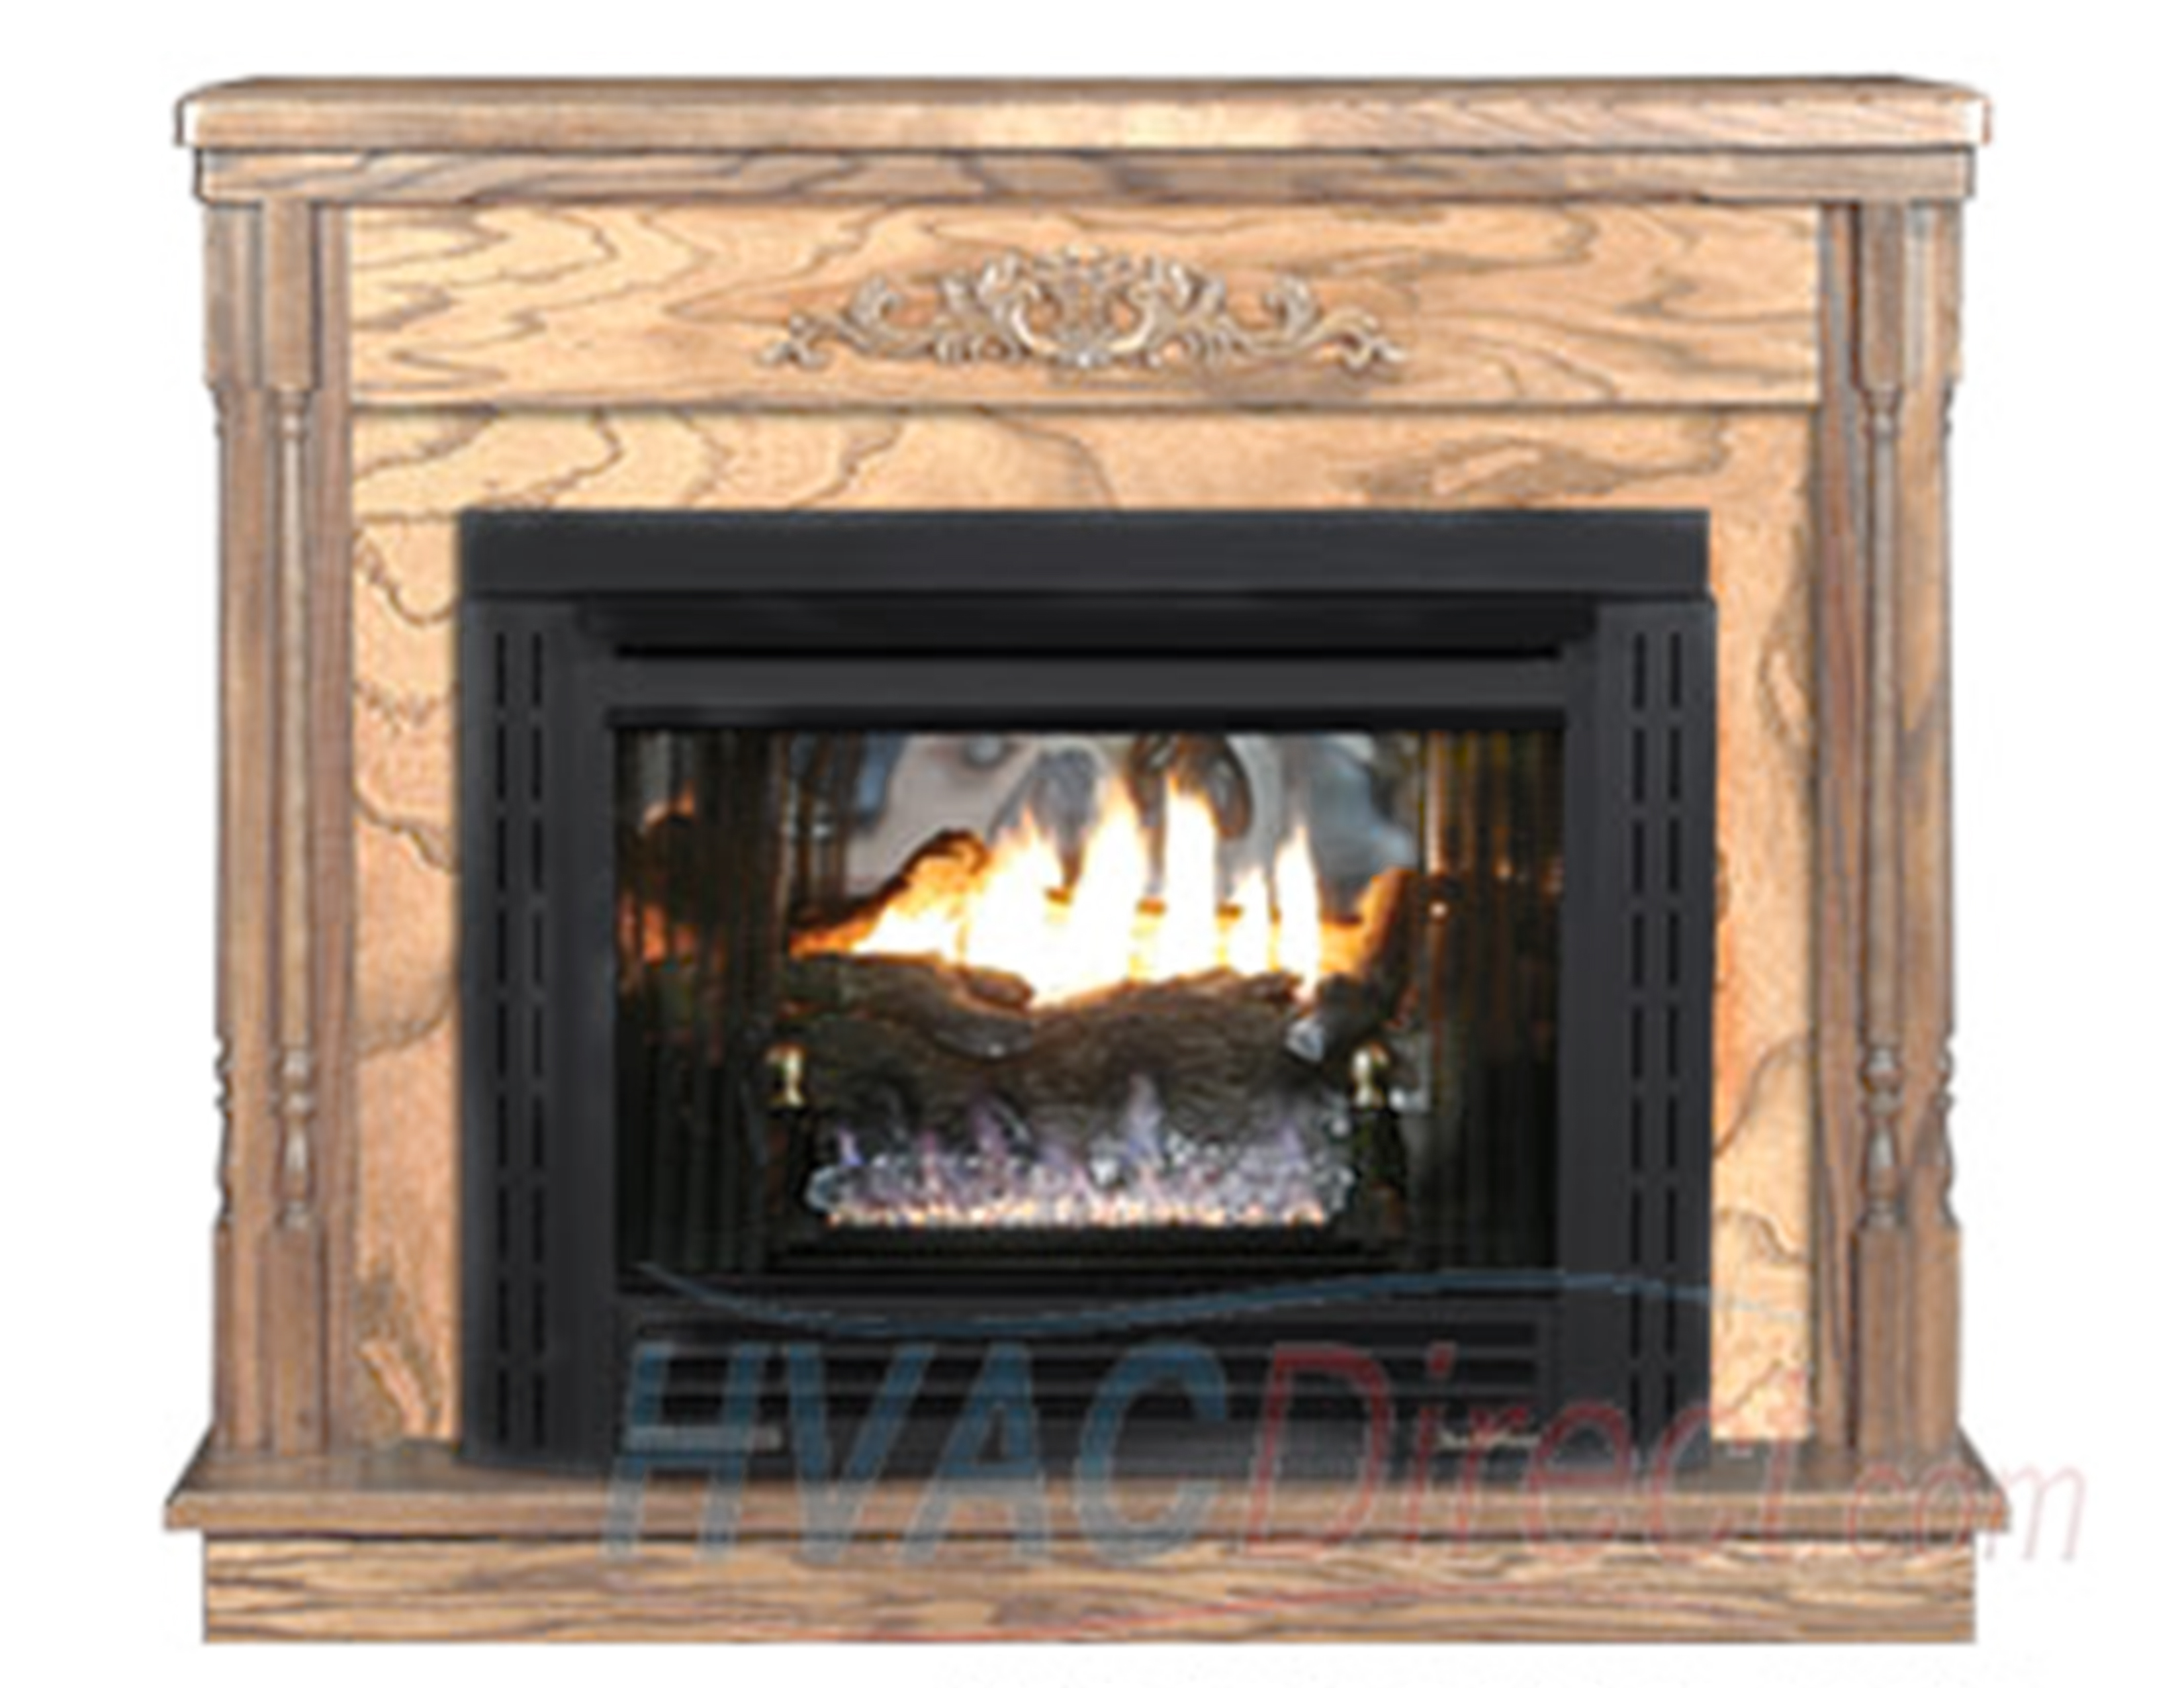 Gas Fireplace Exhaust Vent Clearance Luxury Buck Stove Model 34zc Vent Free Gas Fireplace